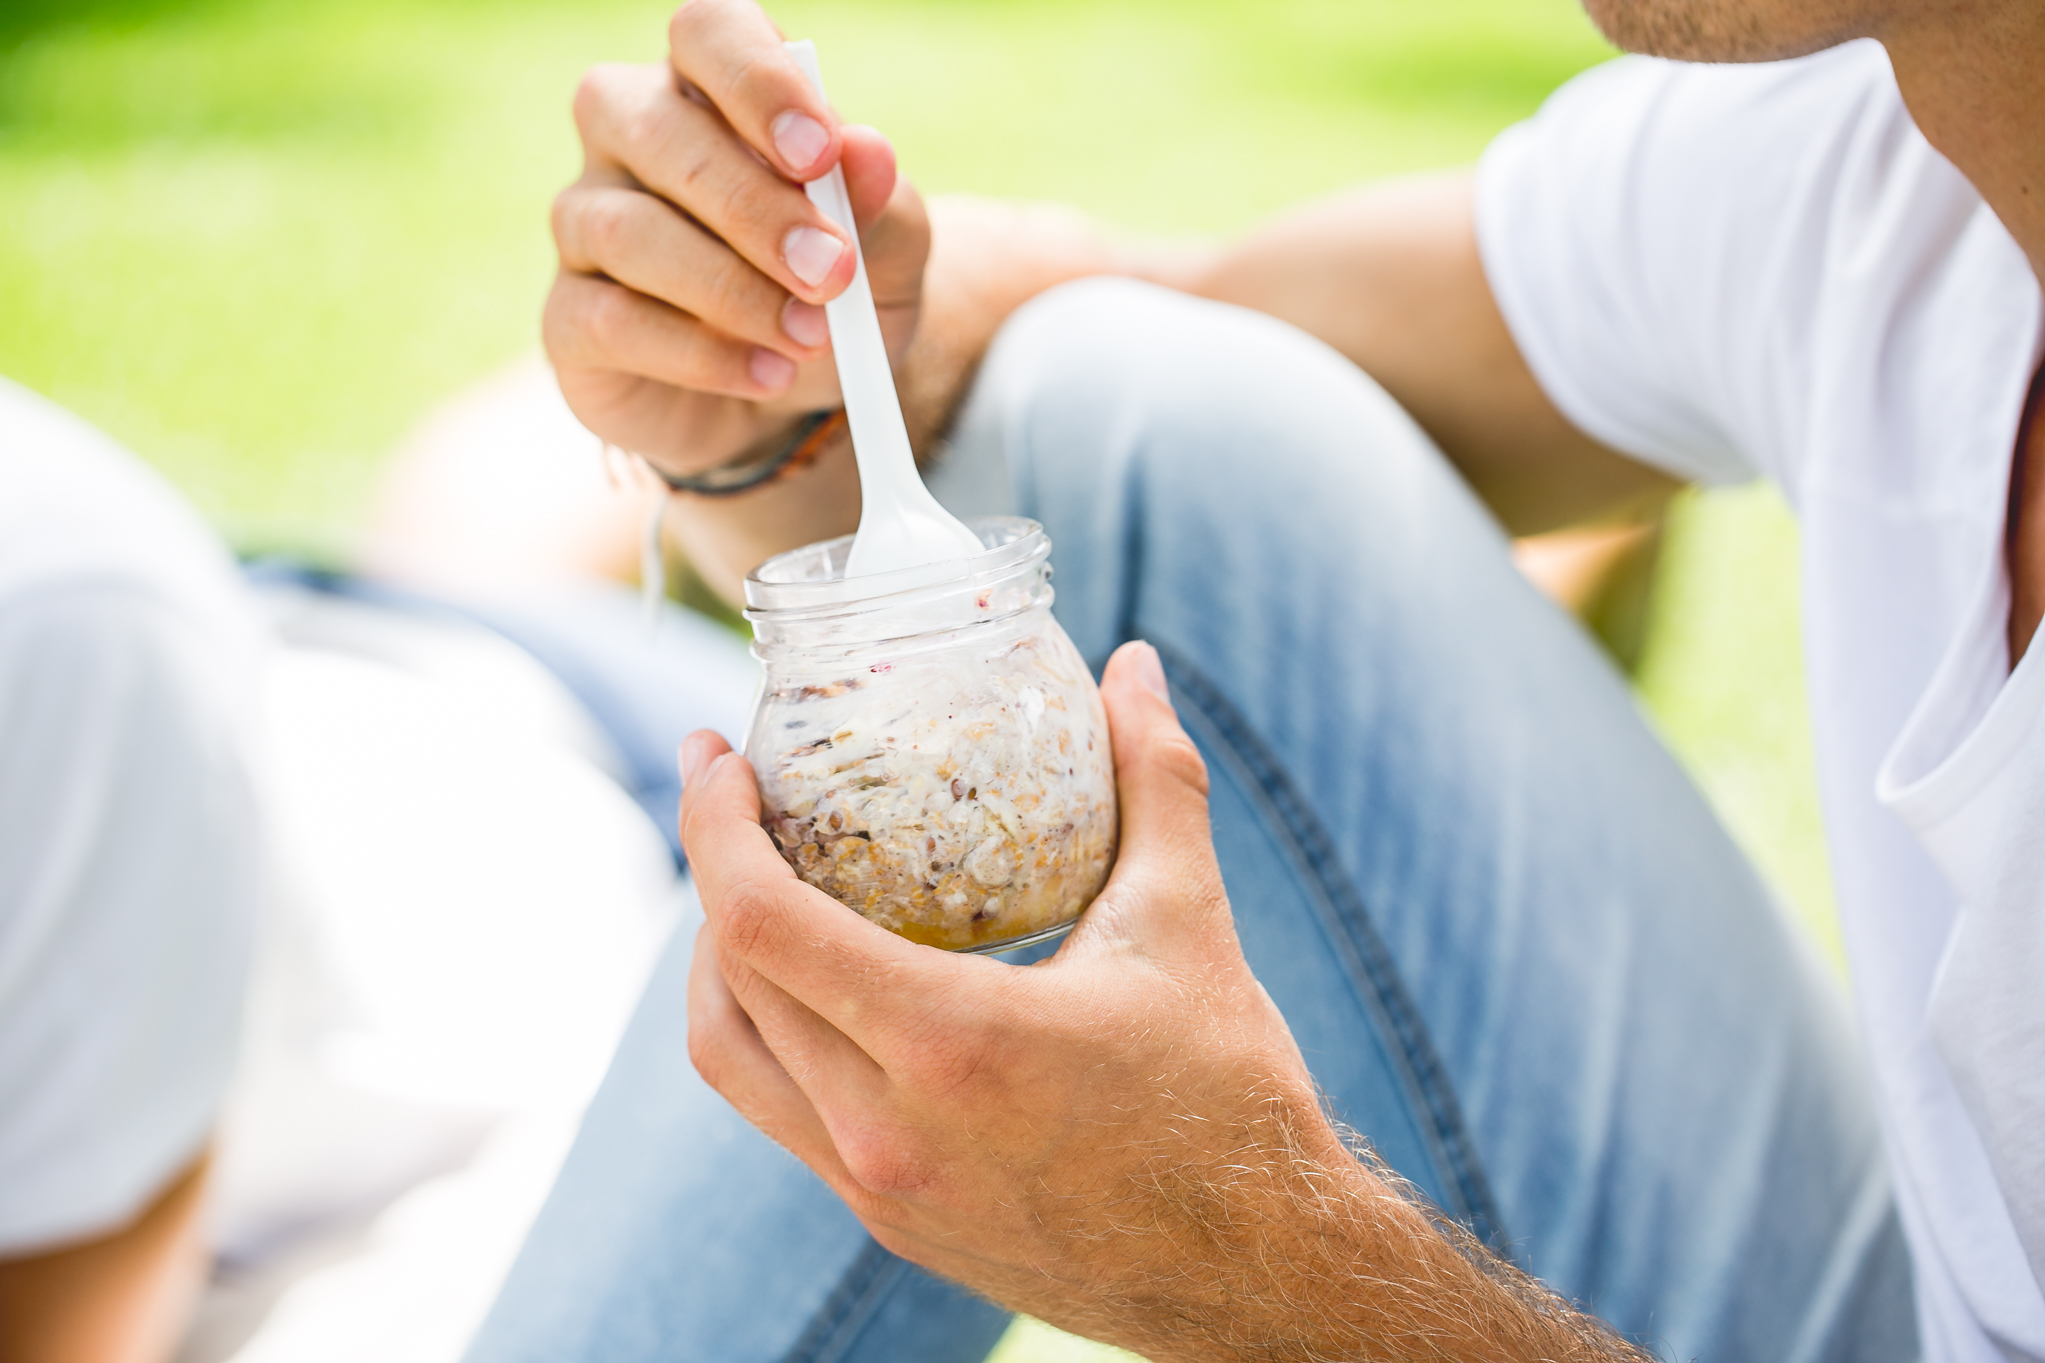 These vegan overnight oats will make your picnic even better.